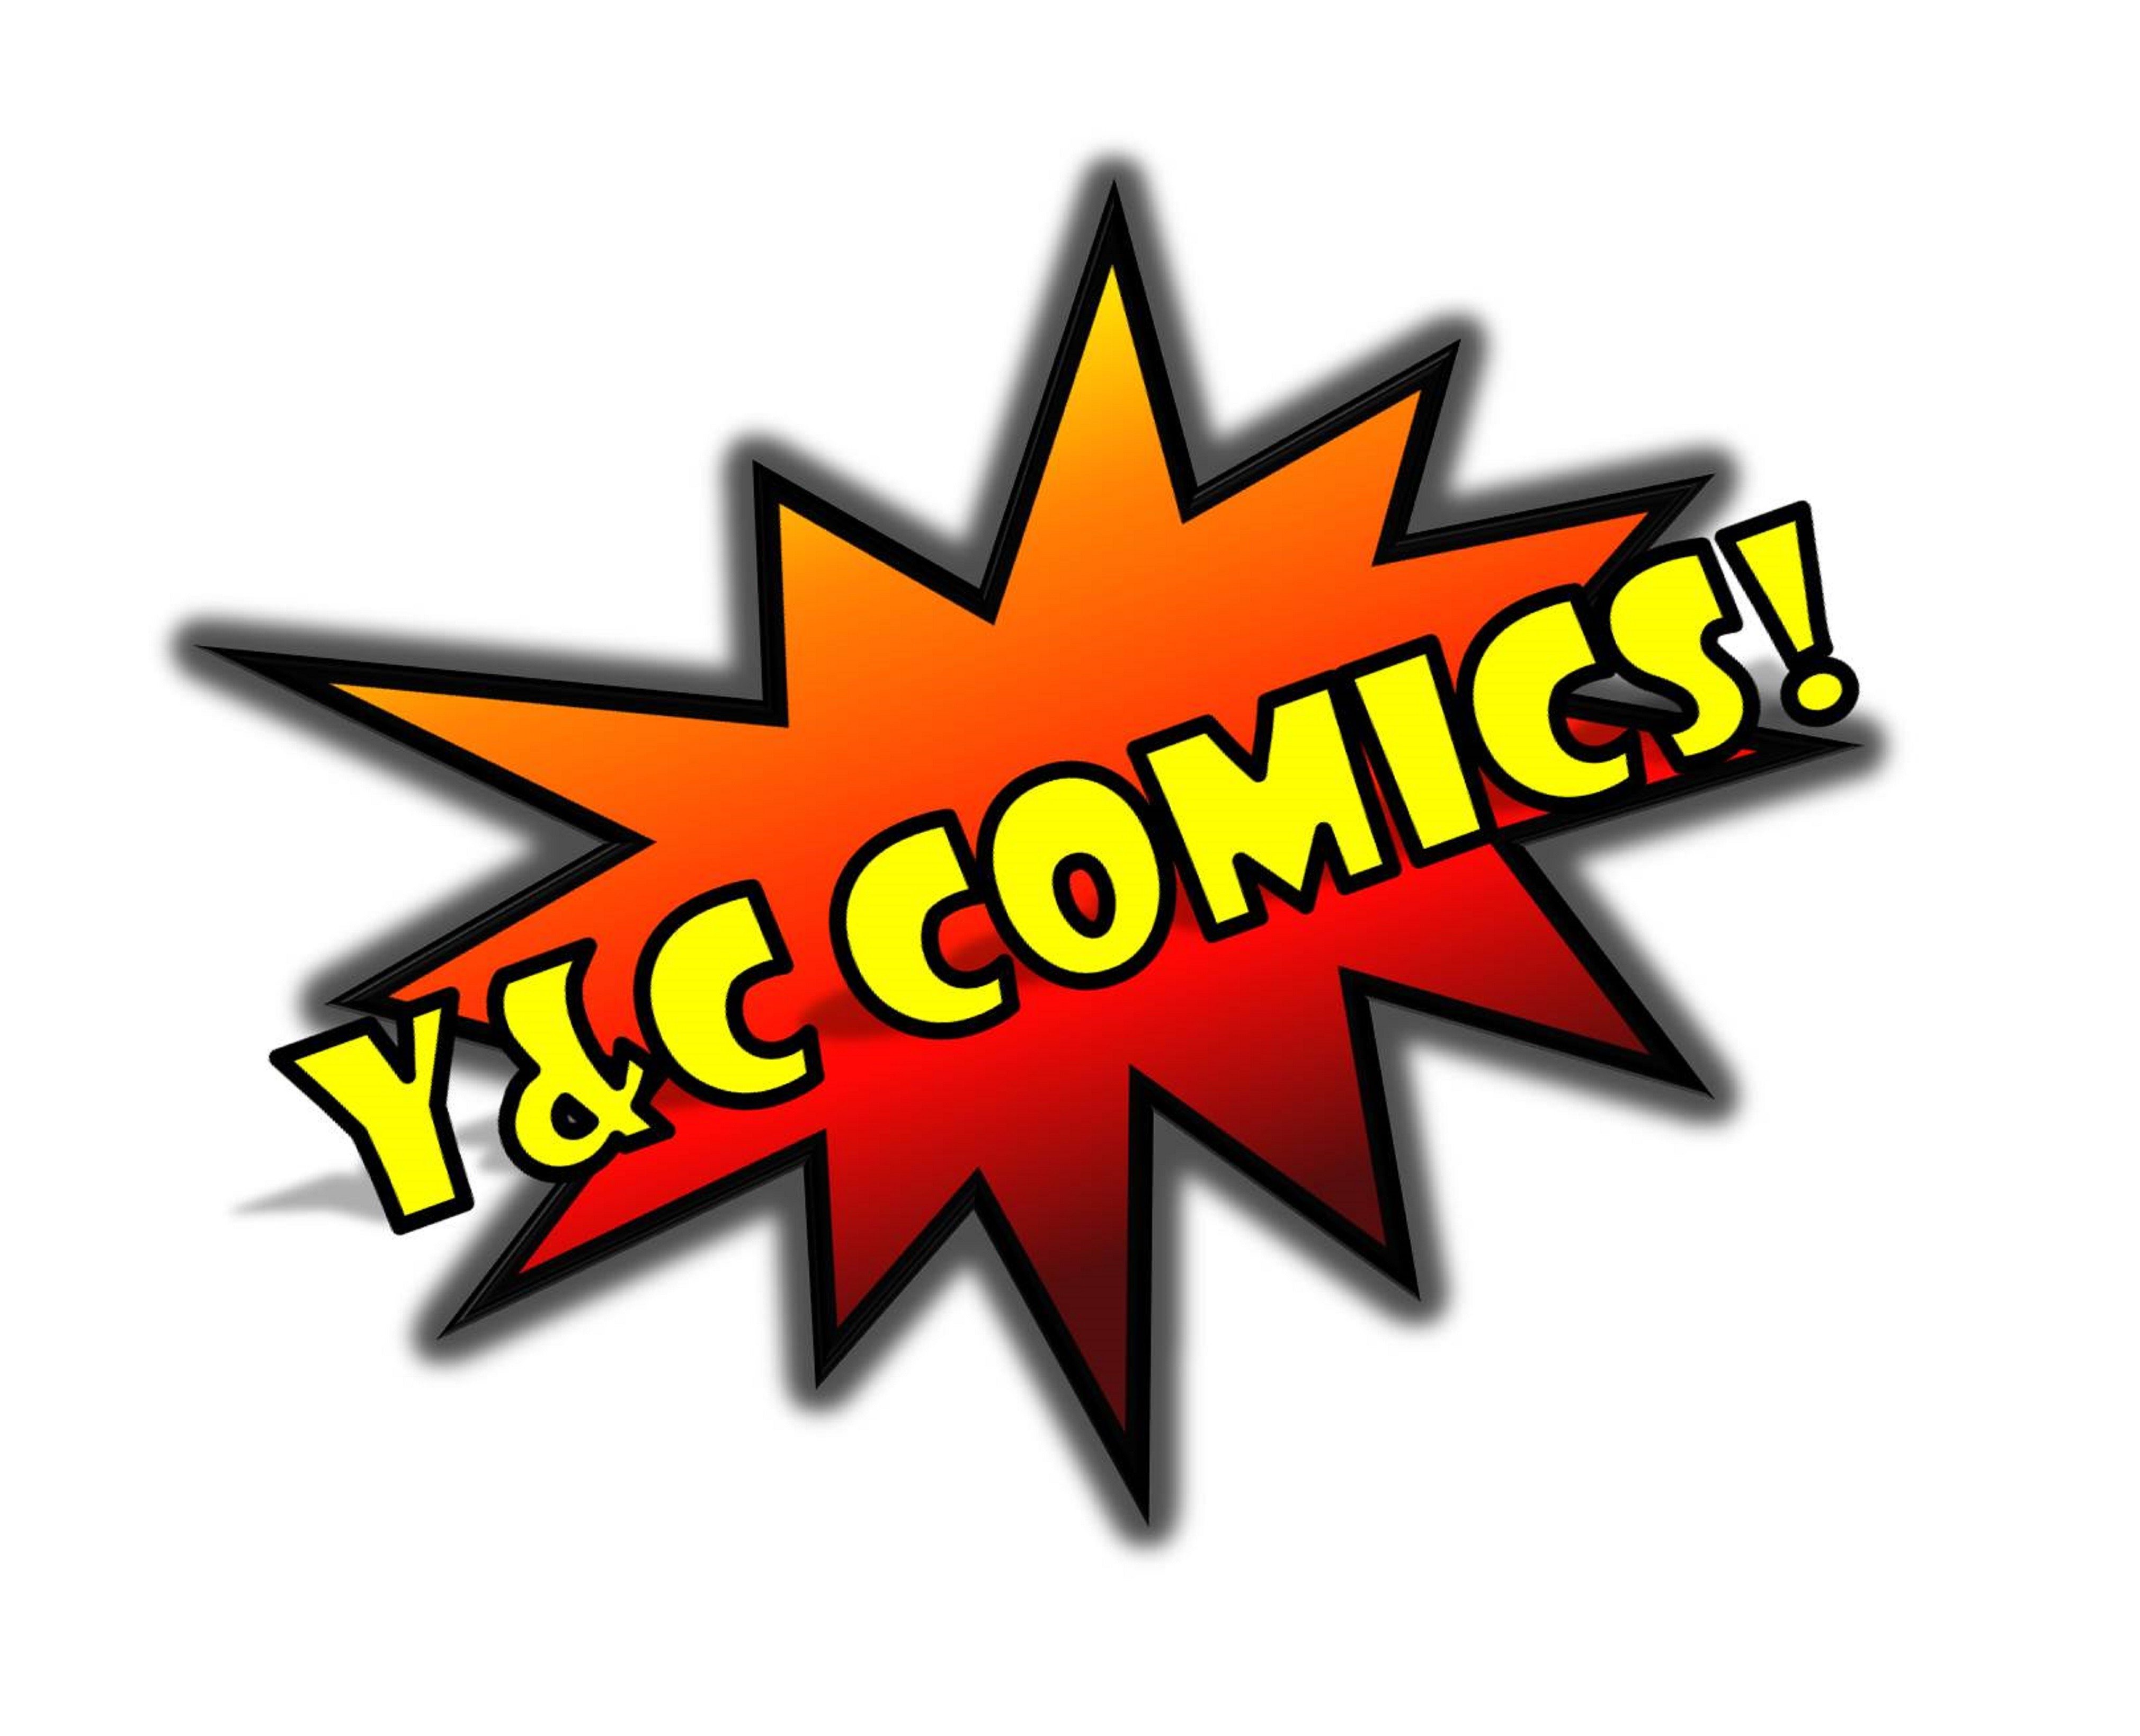 All about Comic Books, Collectible pick ups, movie/TV show reviews and comics collection. Check it out. Todo sobre cómics incluyendo películas, series, etc.